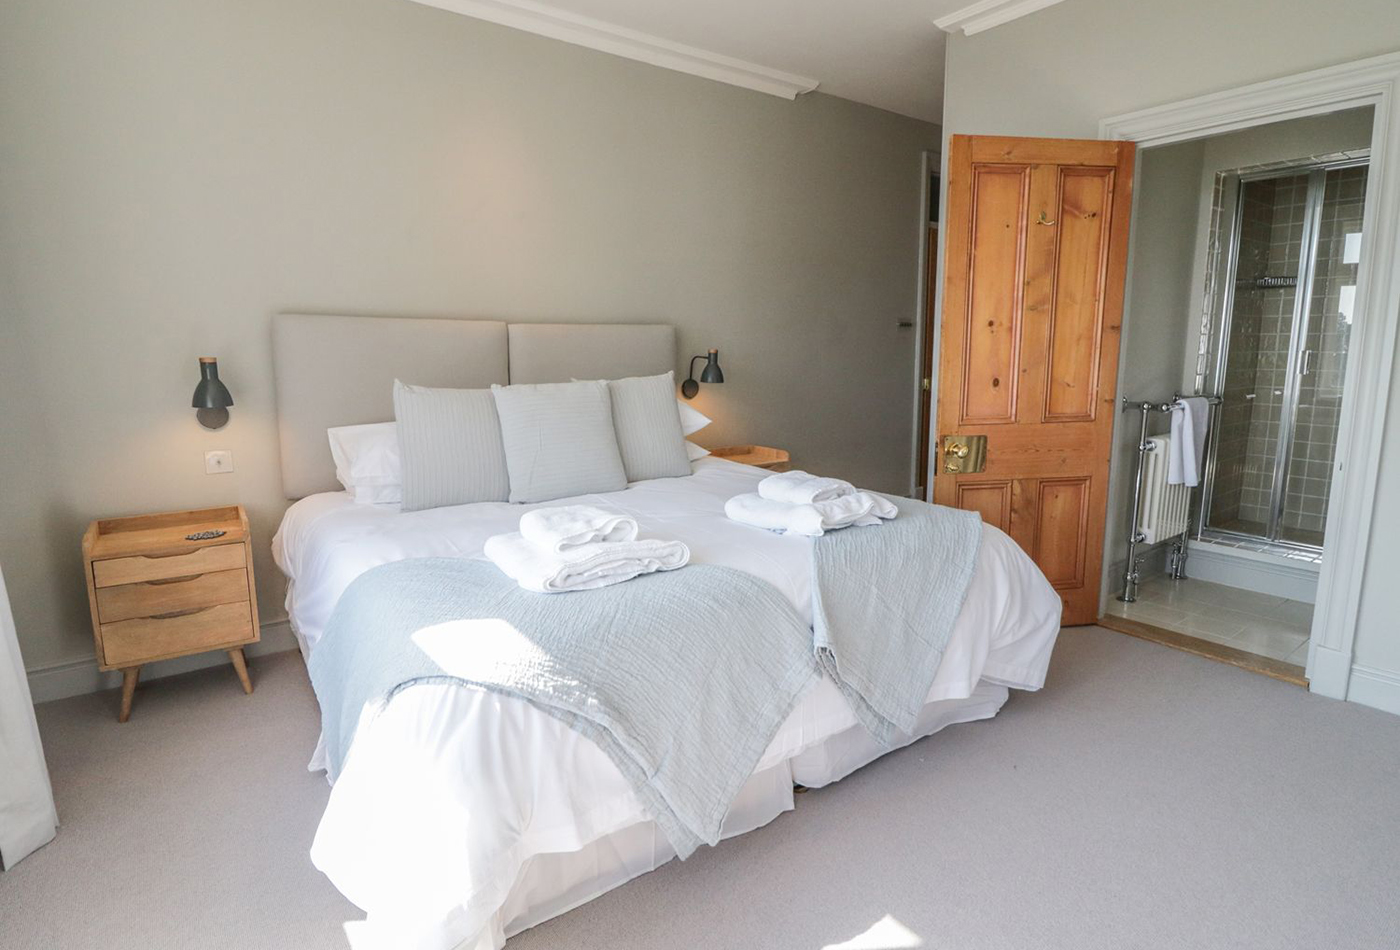 Holiday let changeover and cleaning checklist - double bedroom with ensuite.